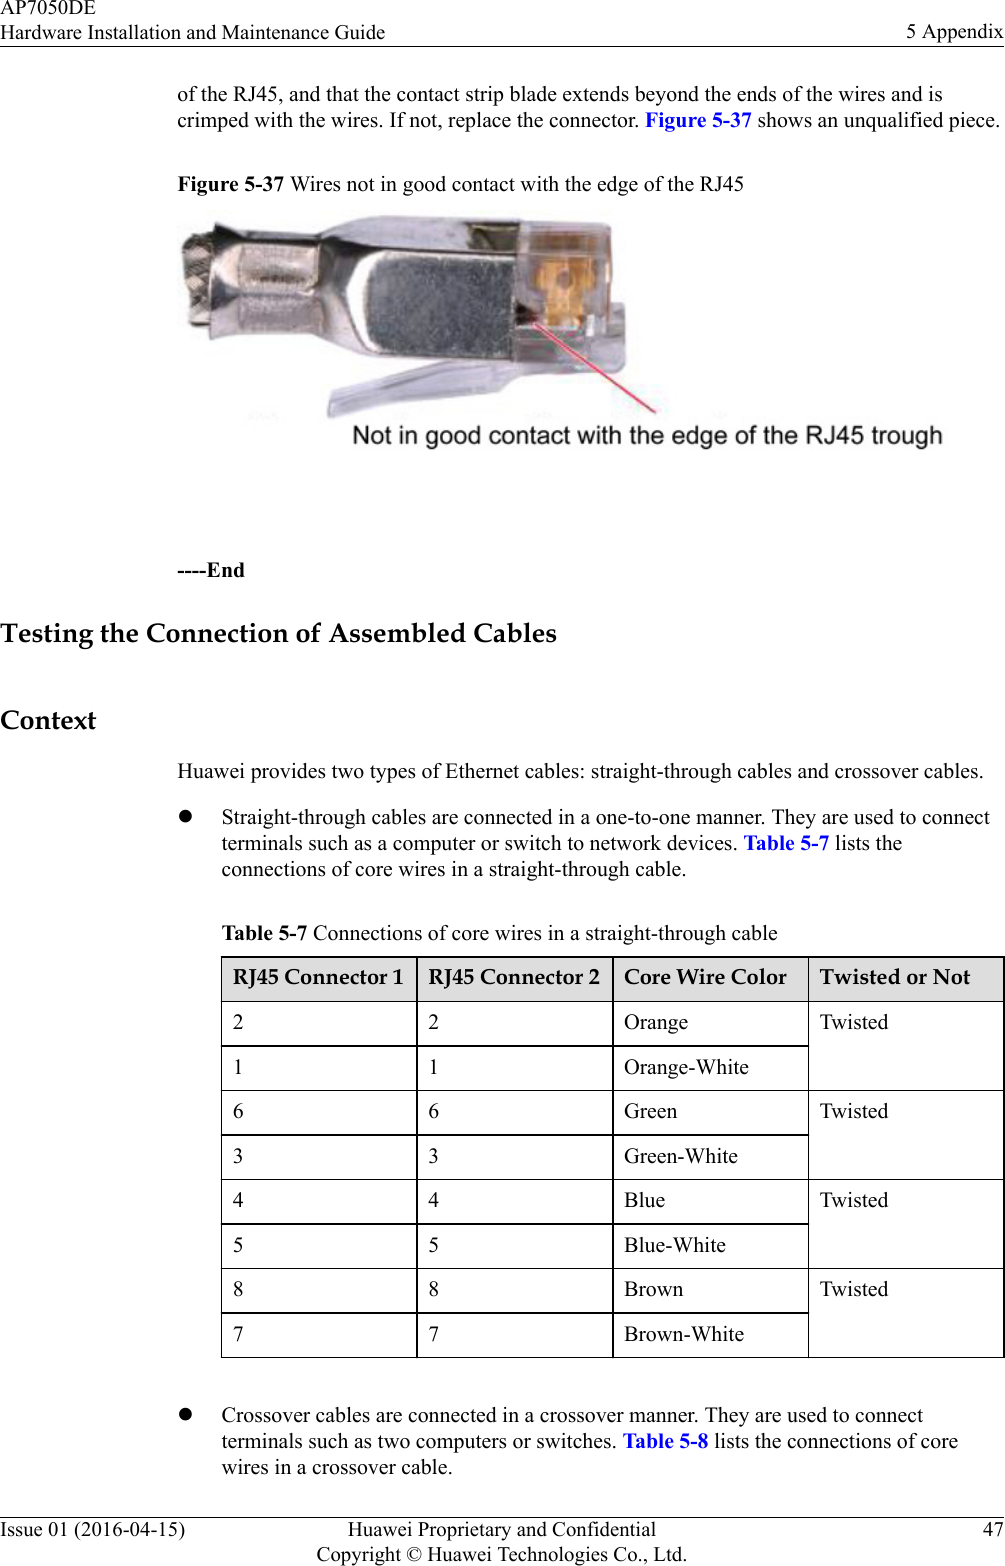 of the RJ45, and that the contact strip blade extends beyond the ends of the wires and iscrimped with the wires. If not, replace the connector. Figure 5-37 shows an unqualified piece.Figure 5-37 Wires not in good contact with the edge of the RJ45 ----EndTesting the Connection of Assembled CablesContextHuawei provides two types of Ethernet cables: straight-through cables and crossover cables.lStraight-through cables are connected in a one-to-one manner. They are used to connectterminals such as a computer or switch to network devices. Table 5-7 lists theconnections of core wires in a straight-through cable.Table 5-7 Connections of core wires in a straight-through cableRJ45 Connector 1 RJ45 Connector 2 Core Wire Color Twisted or Not2 2 Orange Twisted1 1 Orange-White6 6 Green Twisted3 3 Green-White4 4 Blue Twisted5 5 Blue-White8 8 Brown Twisted7 7 Brown-White lCrossover cables are connected in a crossover manner. They are used to connectterminals such as two computers or switches. Table 5-8 lists the connections of corewires in a crossover cable.AP7050DEHardware Installation and Maintenance Guide 5 AppendixIssue 01 (2016-04-15) Huawei Proprietary and ConfidentialCopyright © Huawei Technologies Co., Ltd.47